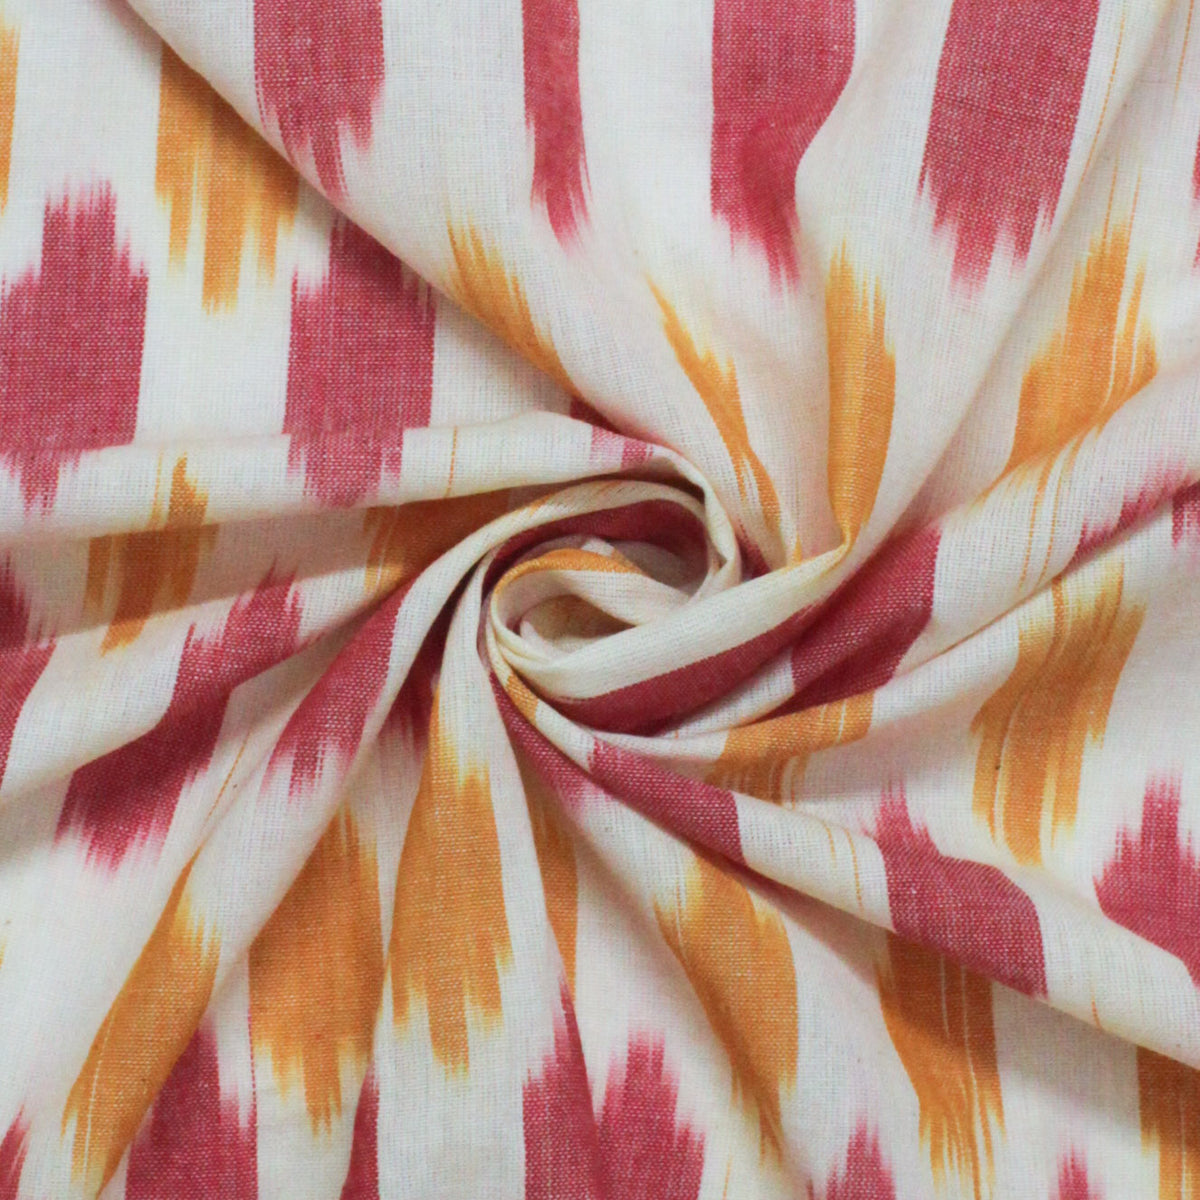 Ikat Hand Woven Cotton Fabric Design - Pink & Yellow Weaves On Cream White Base